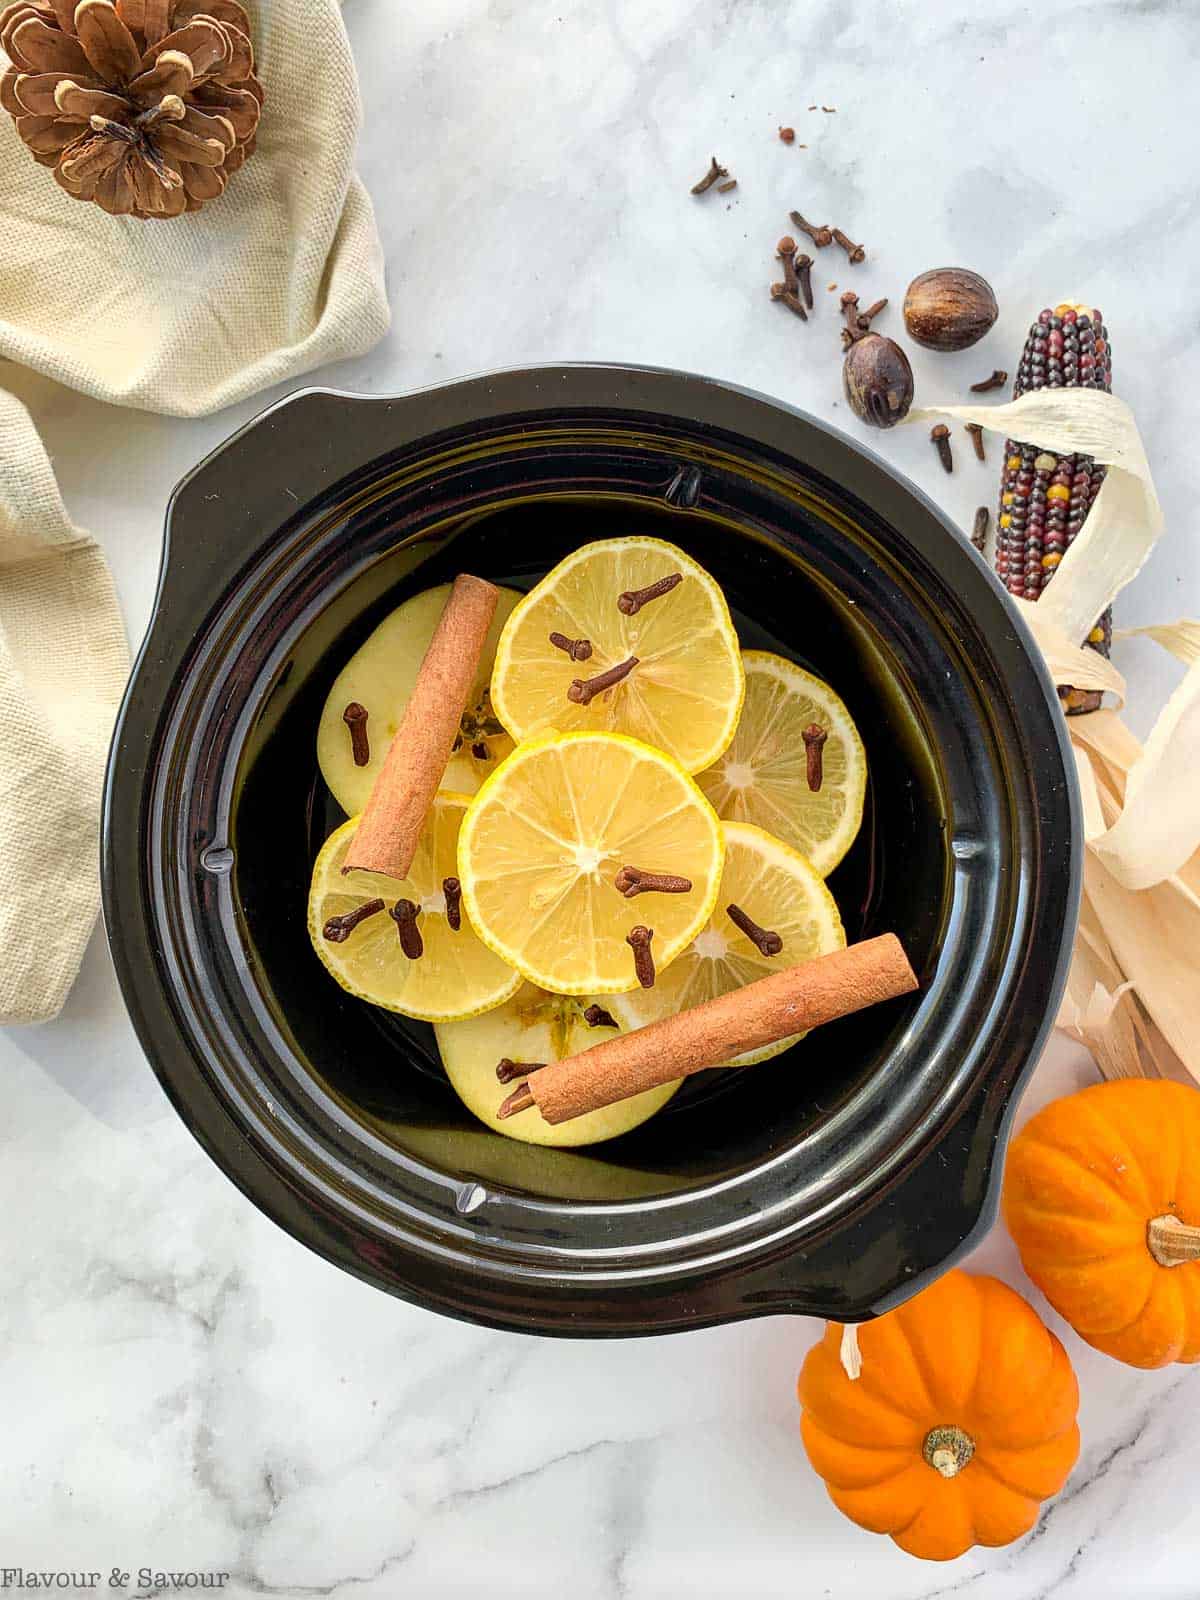 homemade-simmering-fall-potpourri-apple-cinnamon-flavour-and-savour